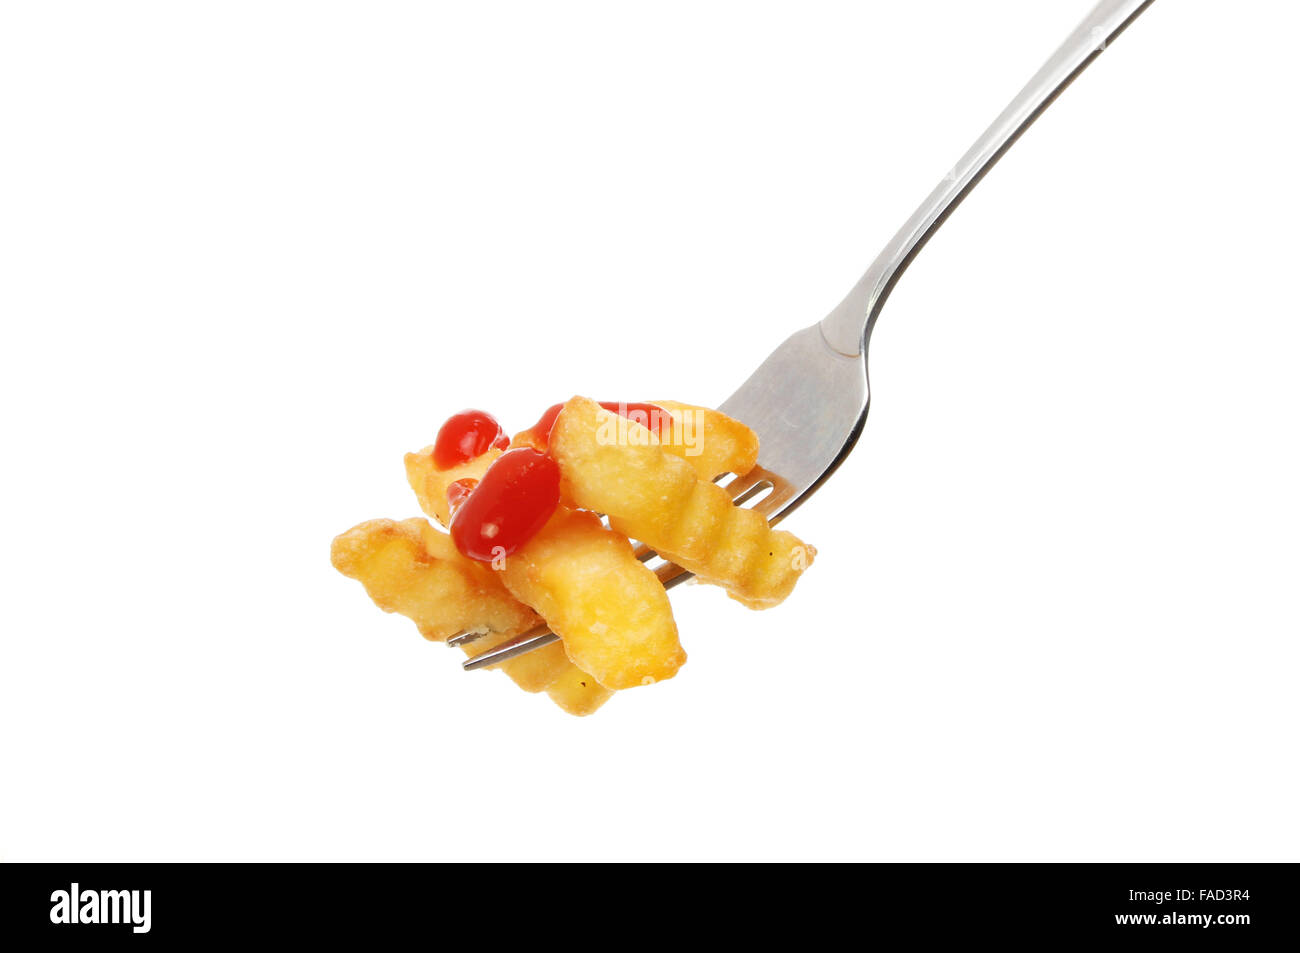 Crinkle cut potato chips with tomato ketchup on a fork isolated against white Stock Photo